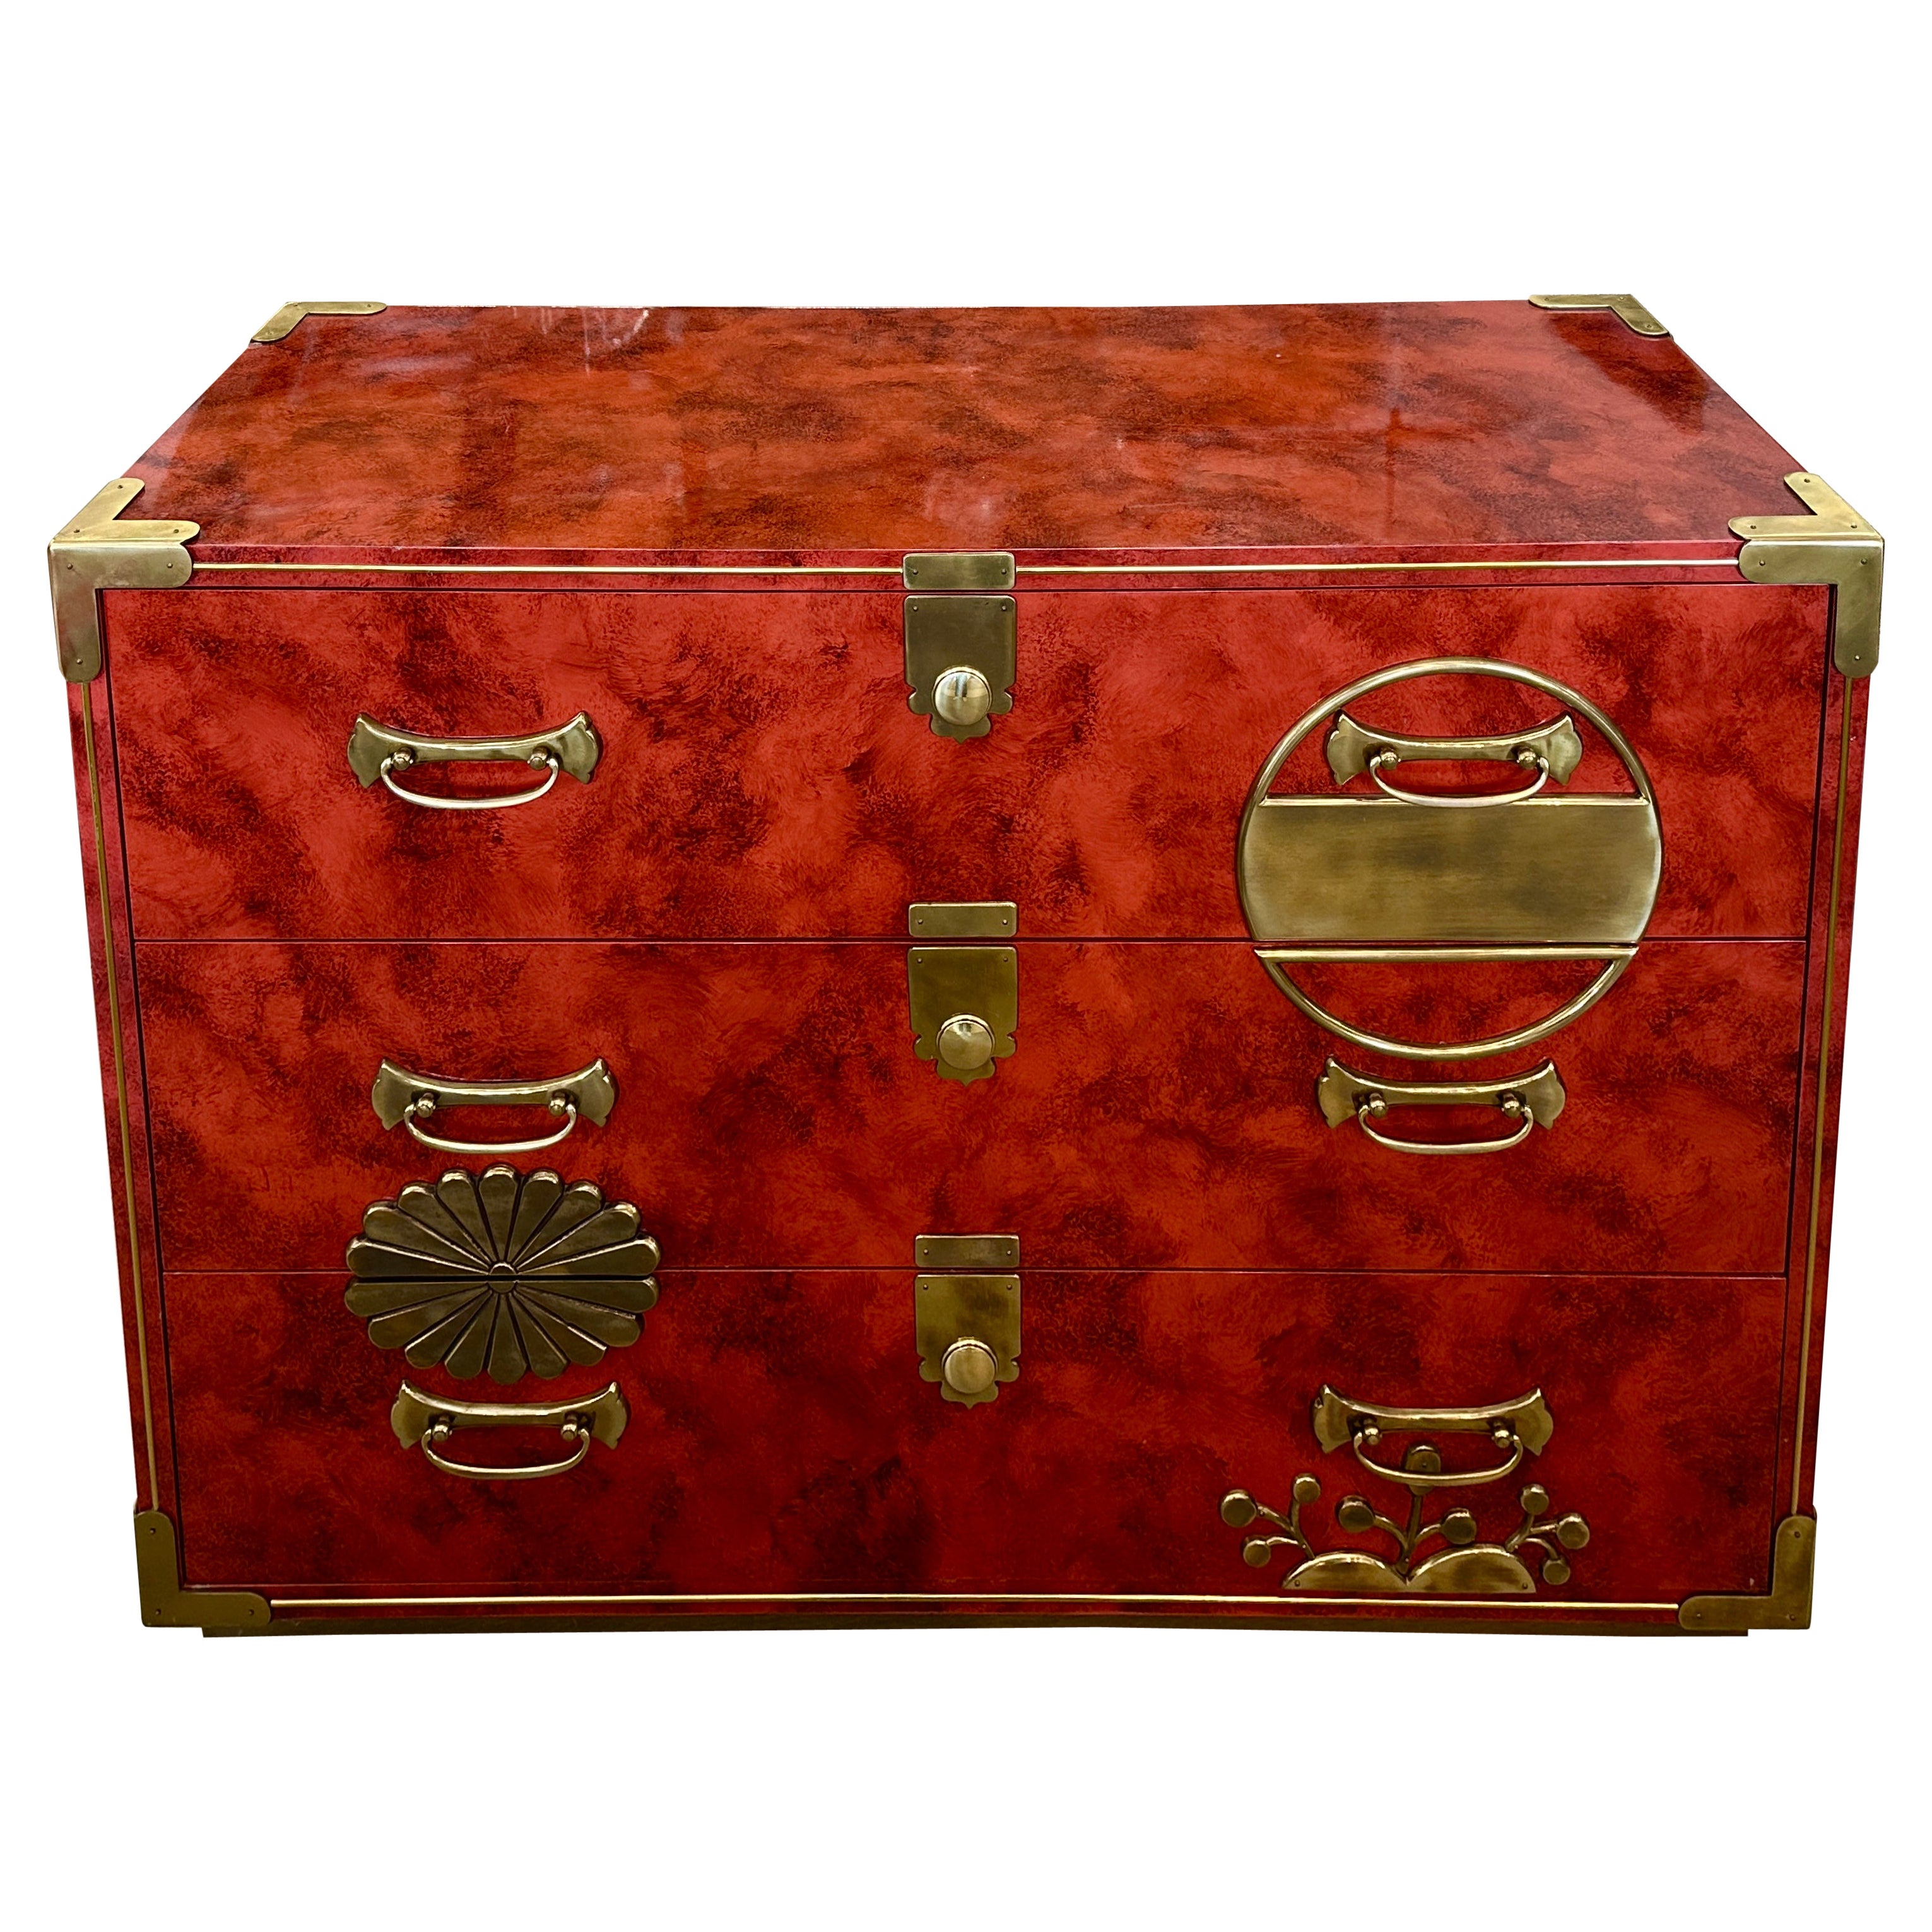 Stunning Coral Red Lacquer & Brass Mastercraft Asian Chest For Sale